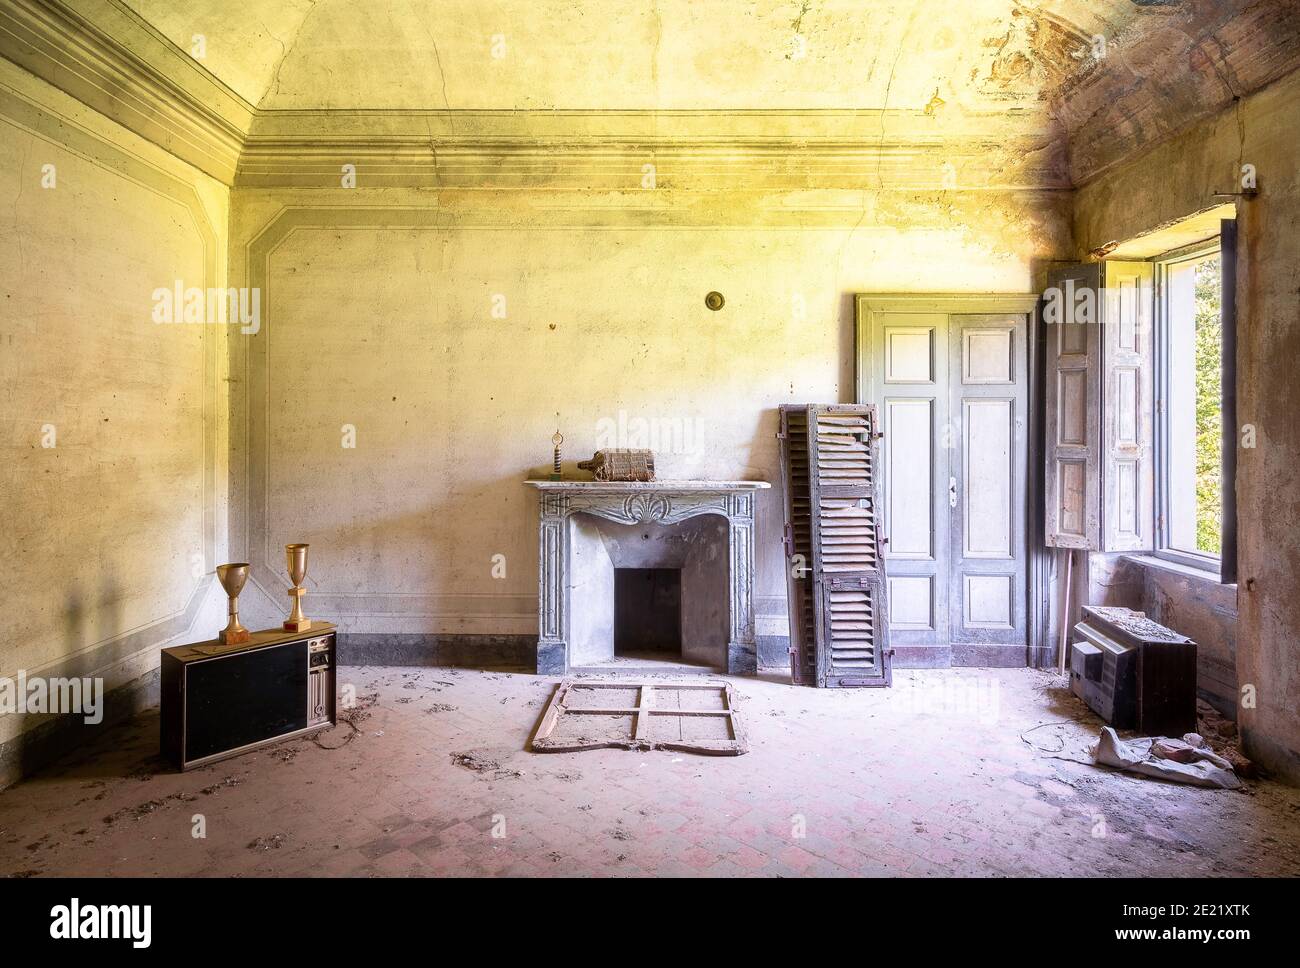 Stunning Room in an Abandoned and Derelict Building Stock Photo